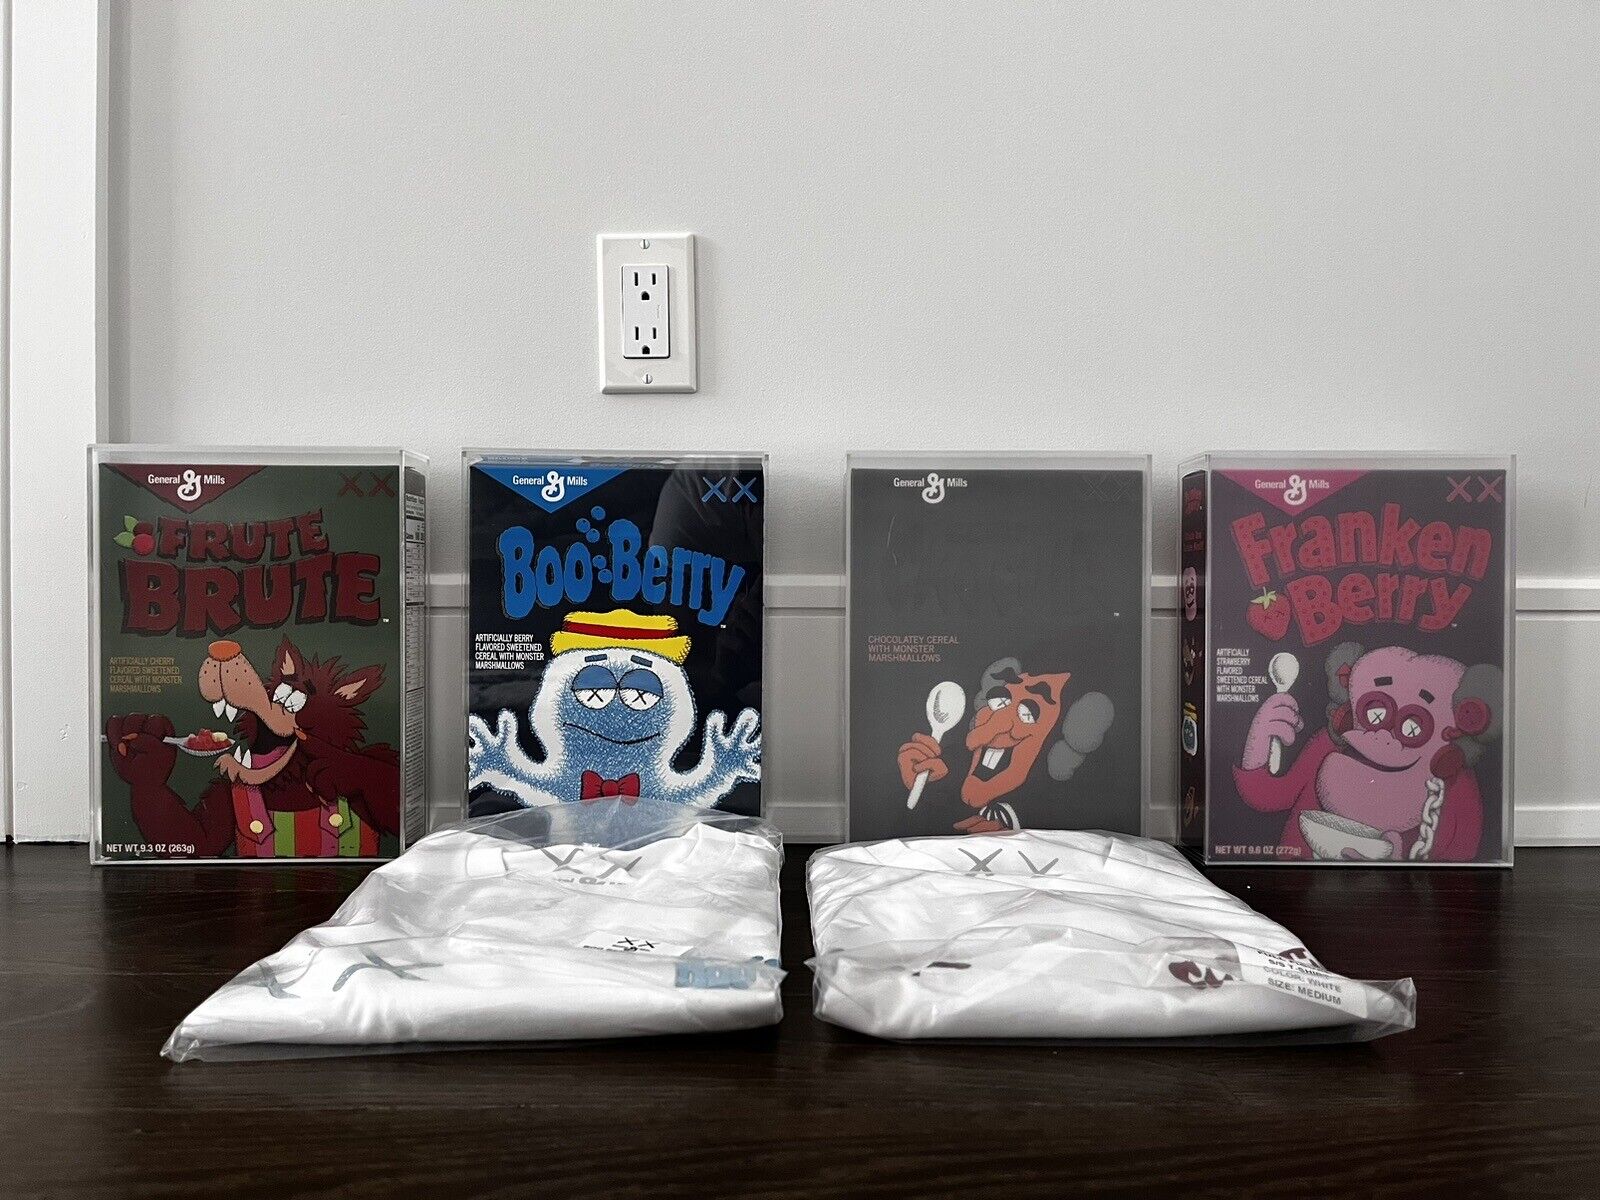 Kaws x Monsters Limited Edition Set of 4 Cereal Boxes and Shirts (Sealed)